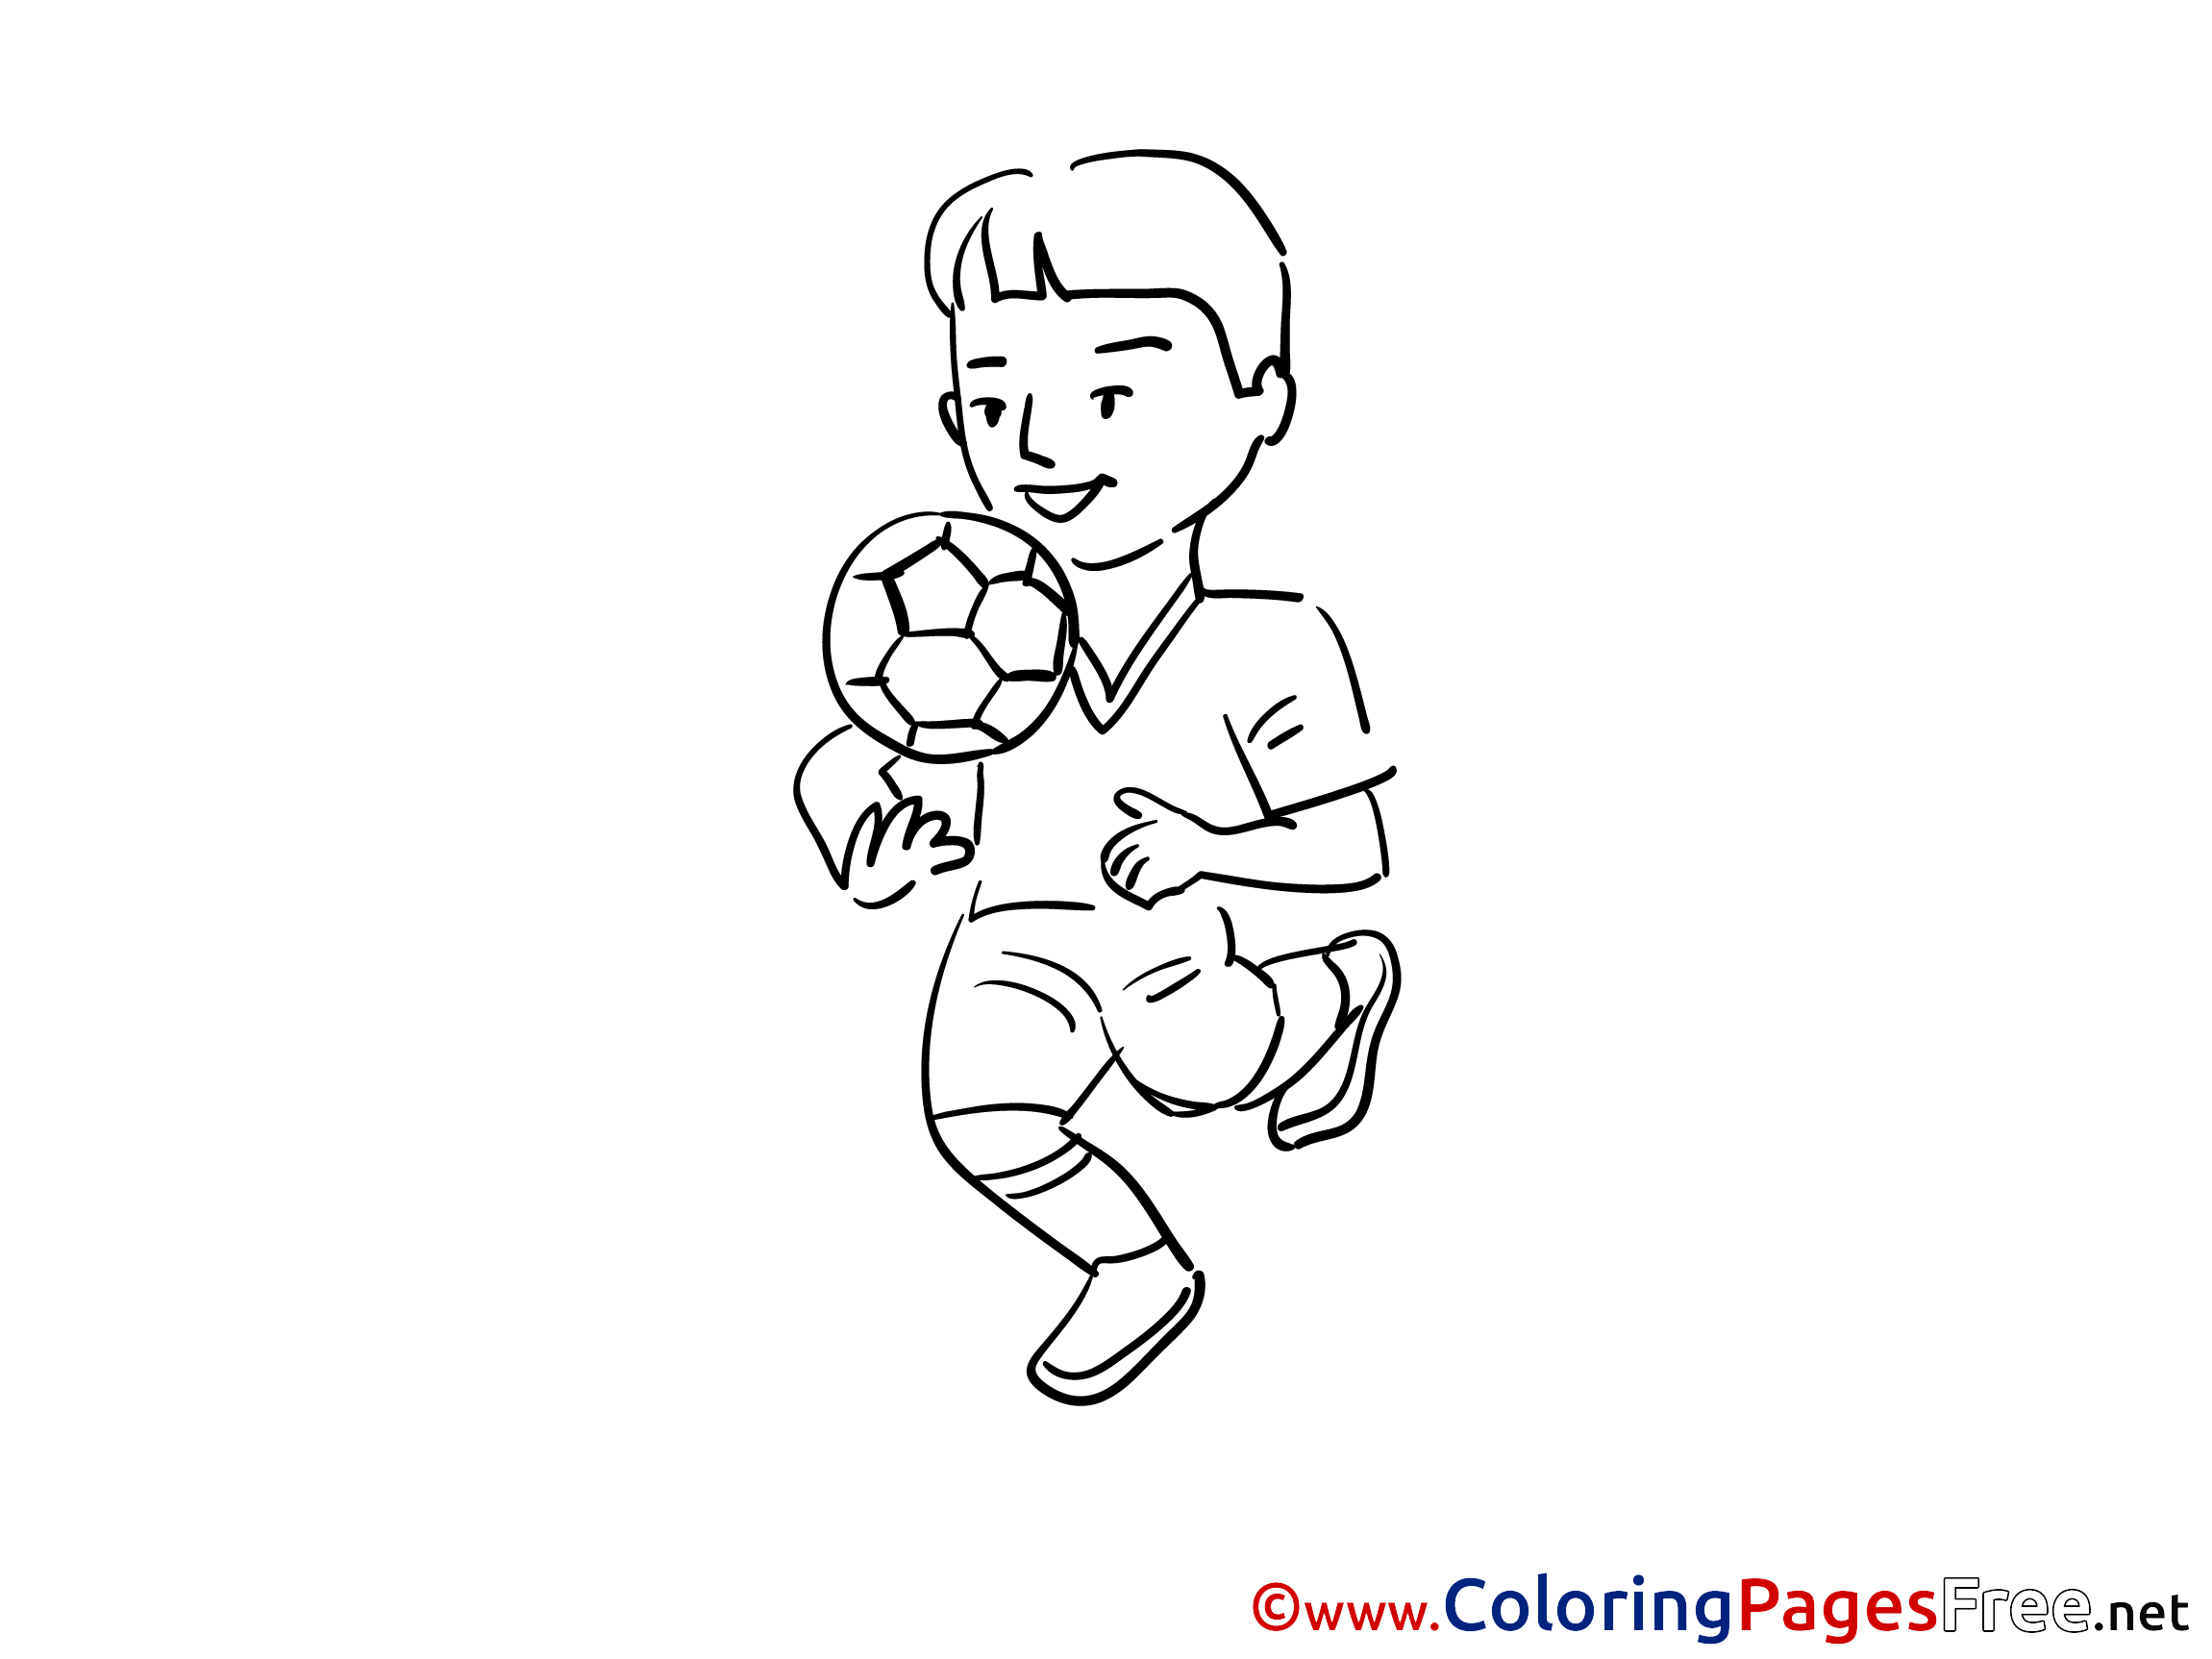 Boy Football for Kids Soccer Colouring Page